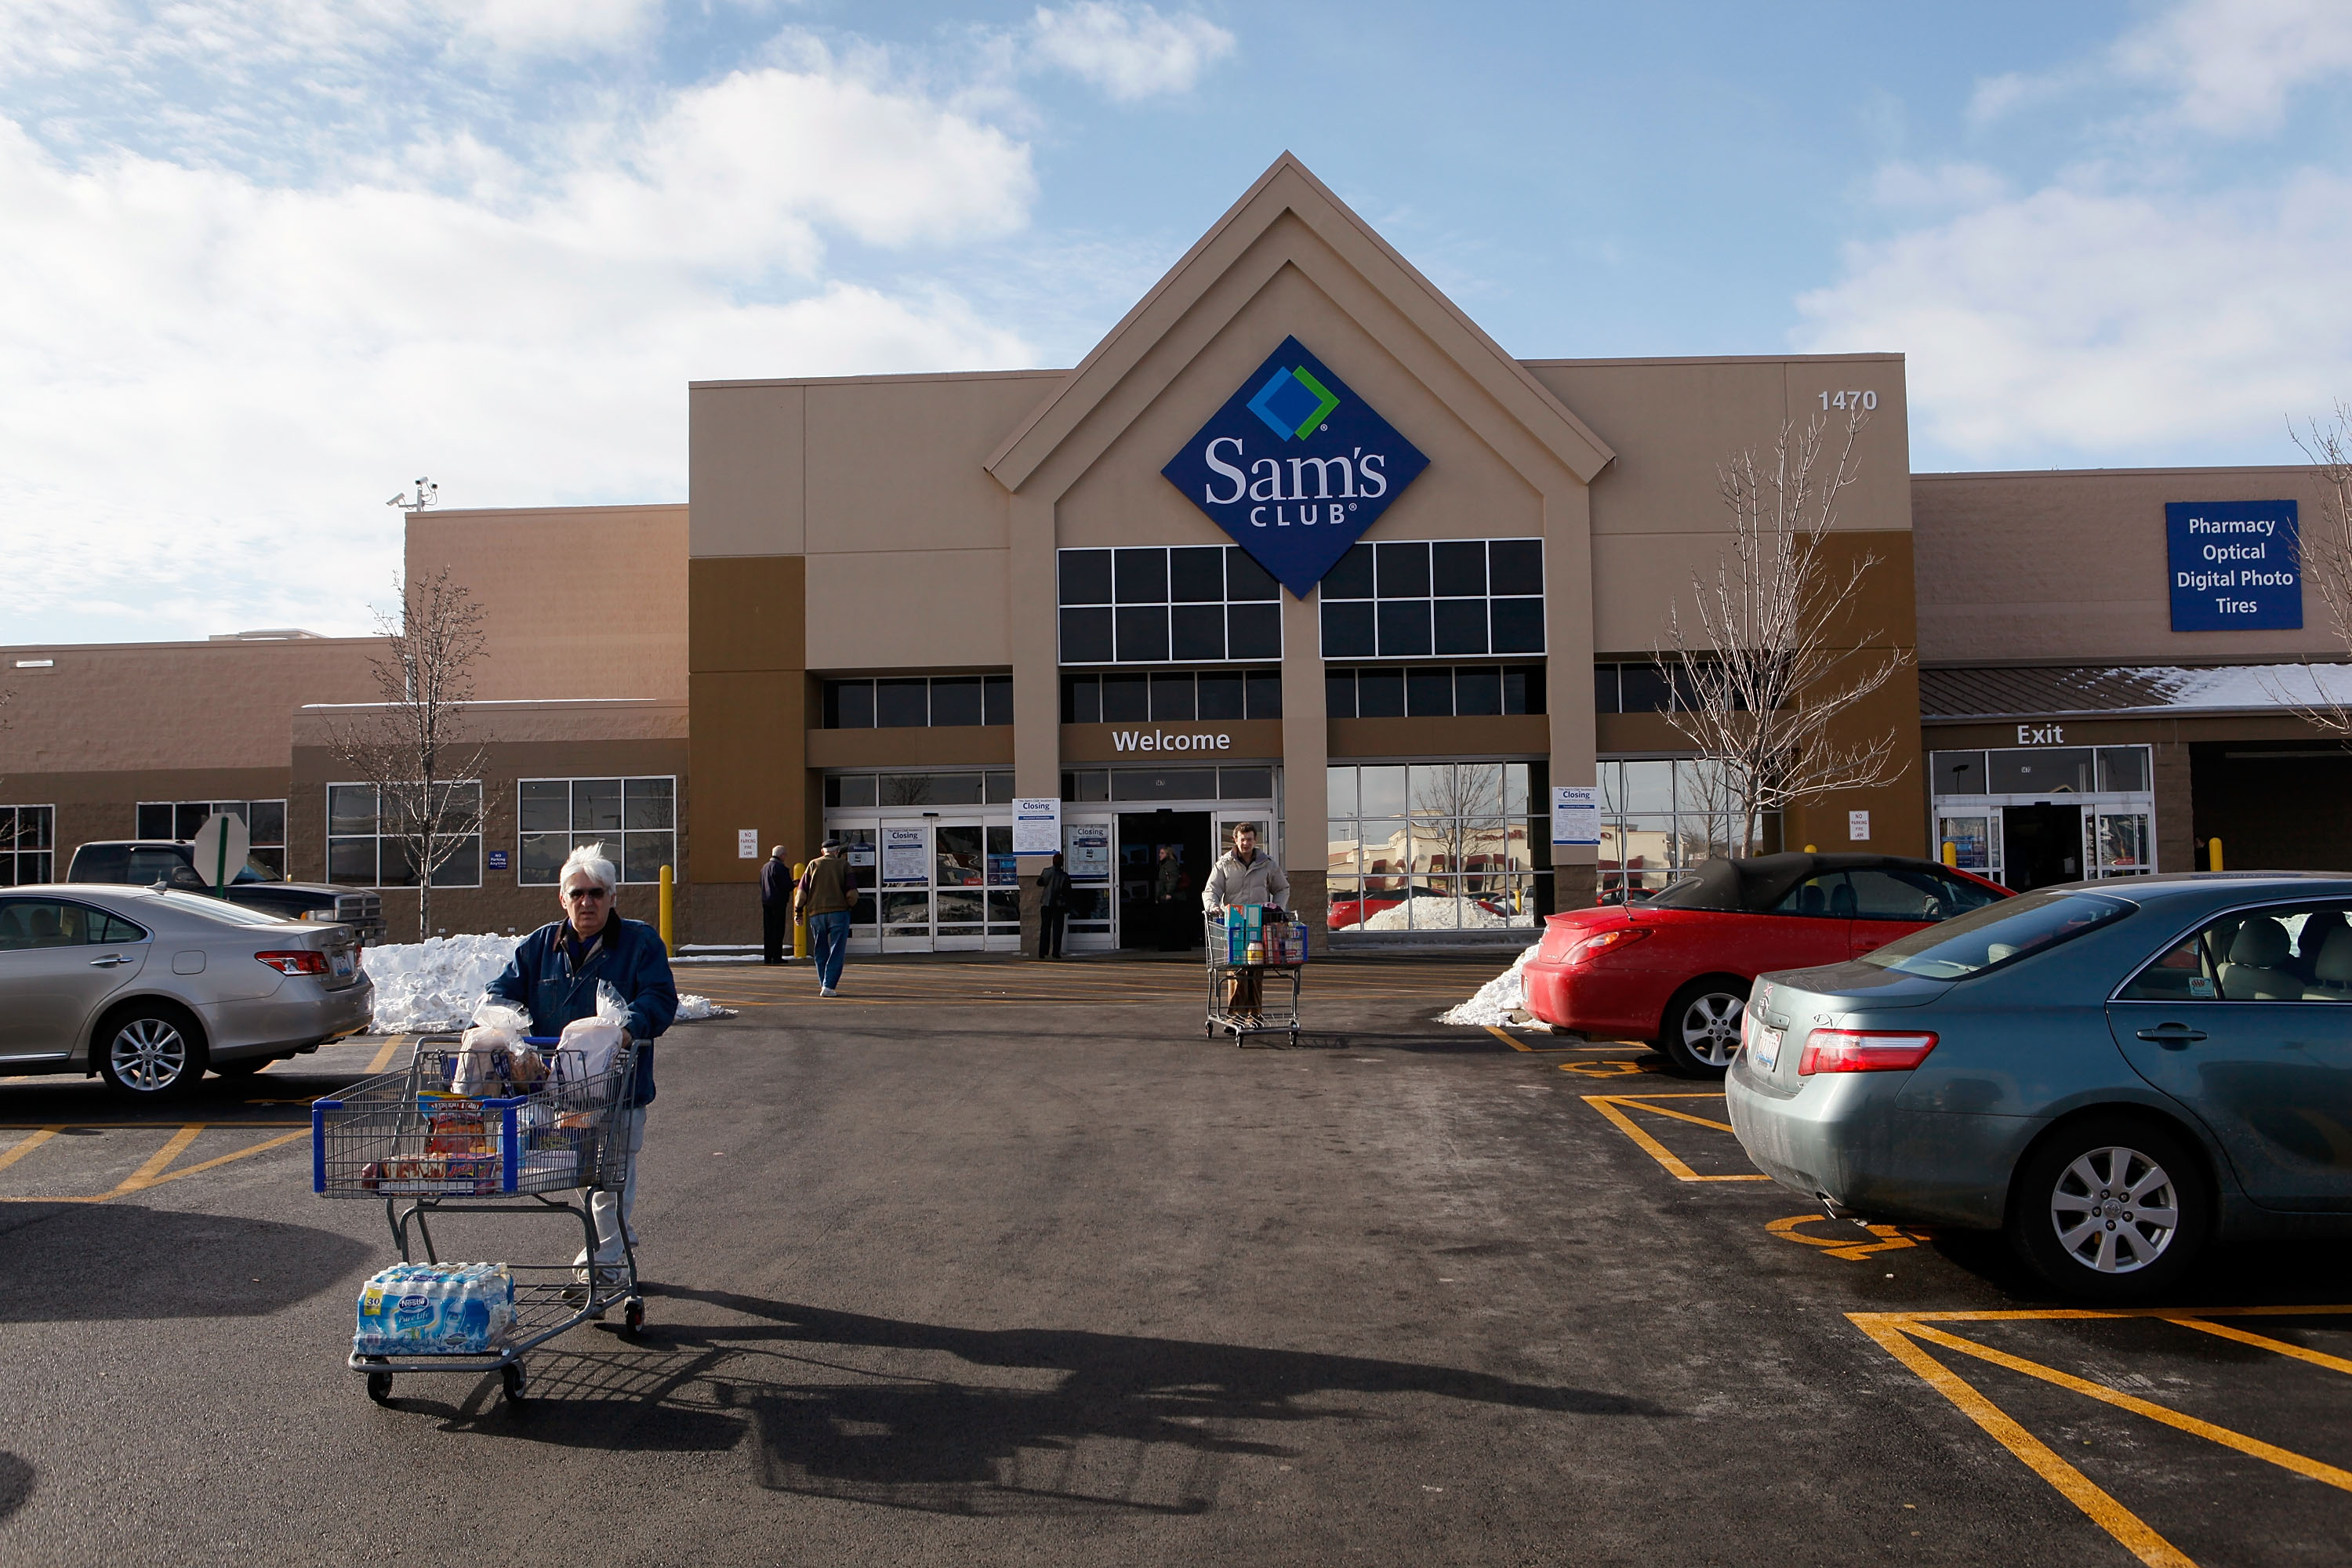 New Year's Eve store hours 2016 What time is Sam's Club open?